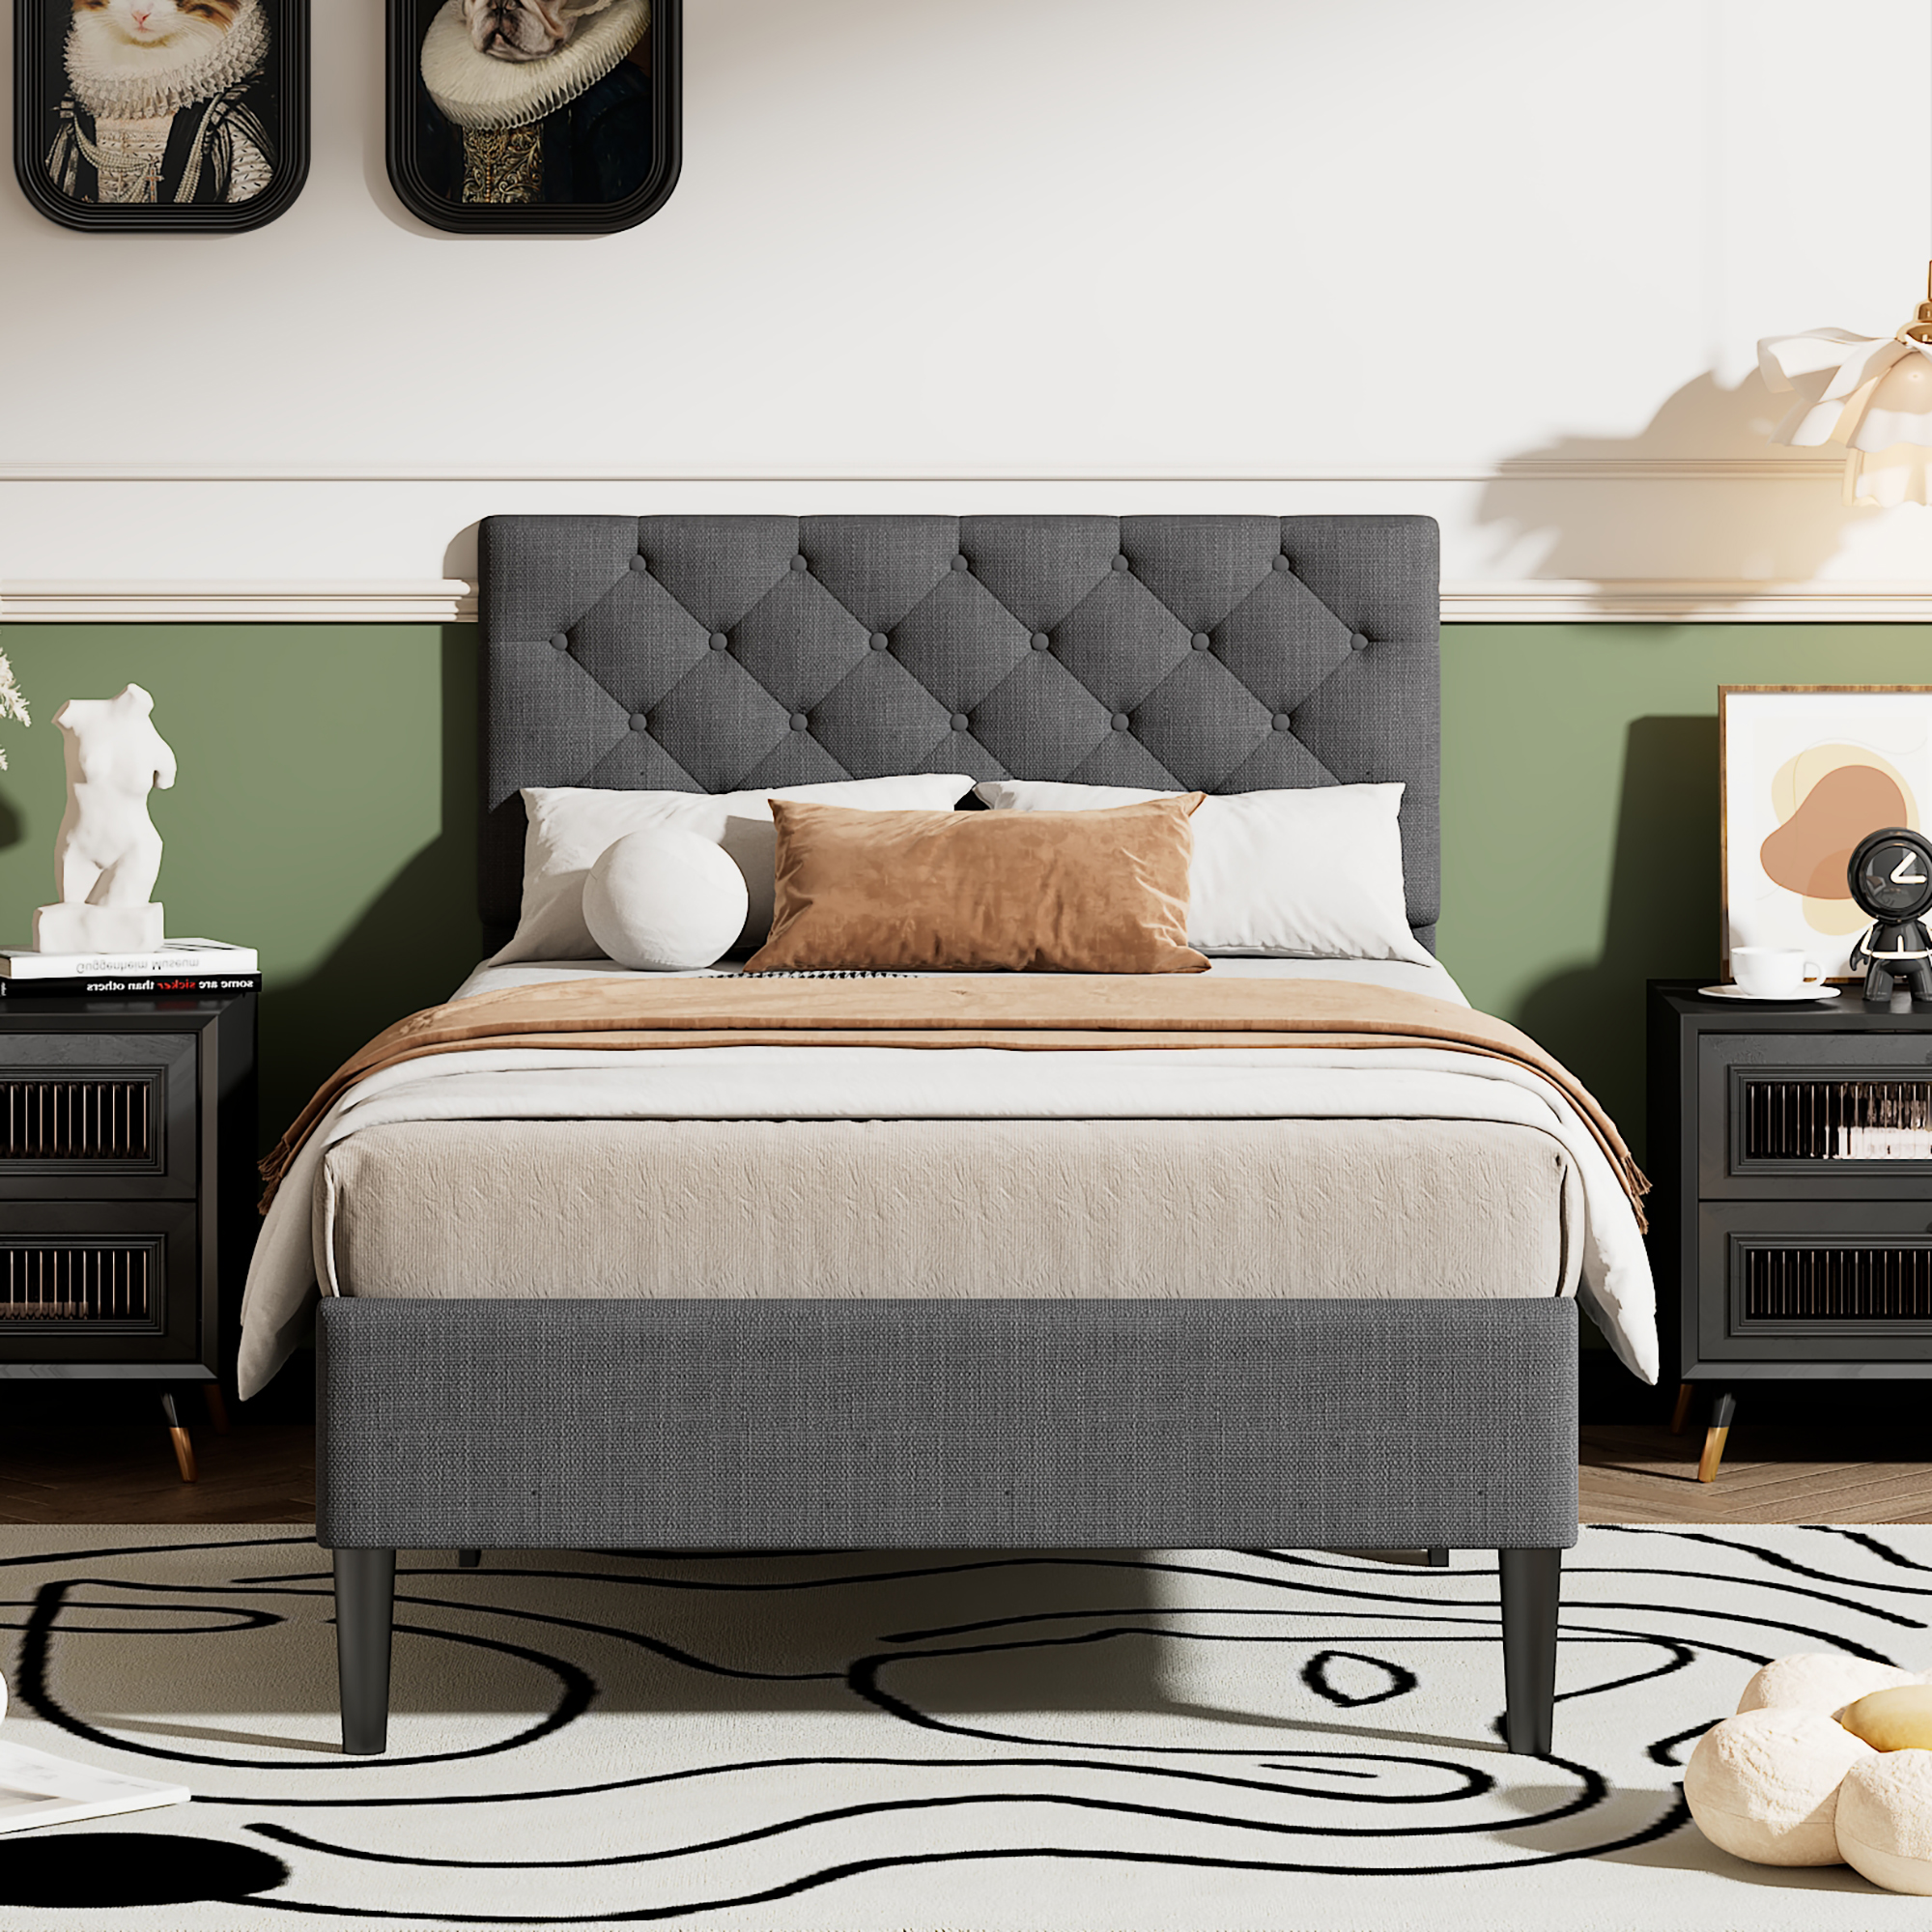 Modern Upholstered Platform Twin Bed Frame, Heavy Duty Twin Bed Frame with Headboard, Gray Twin Bed Frame with Wood Slat Support, Mattress Foundation for Adults Kids, No Box Spring Needed, Q10586 - image 2 of 10